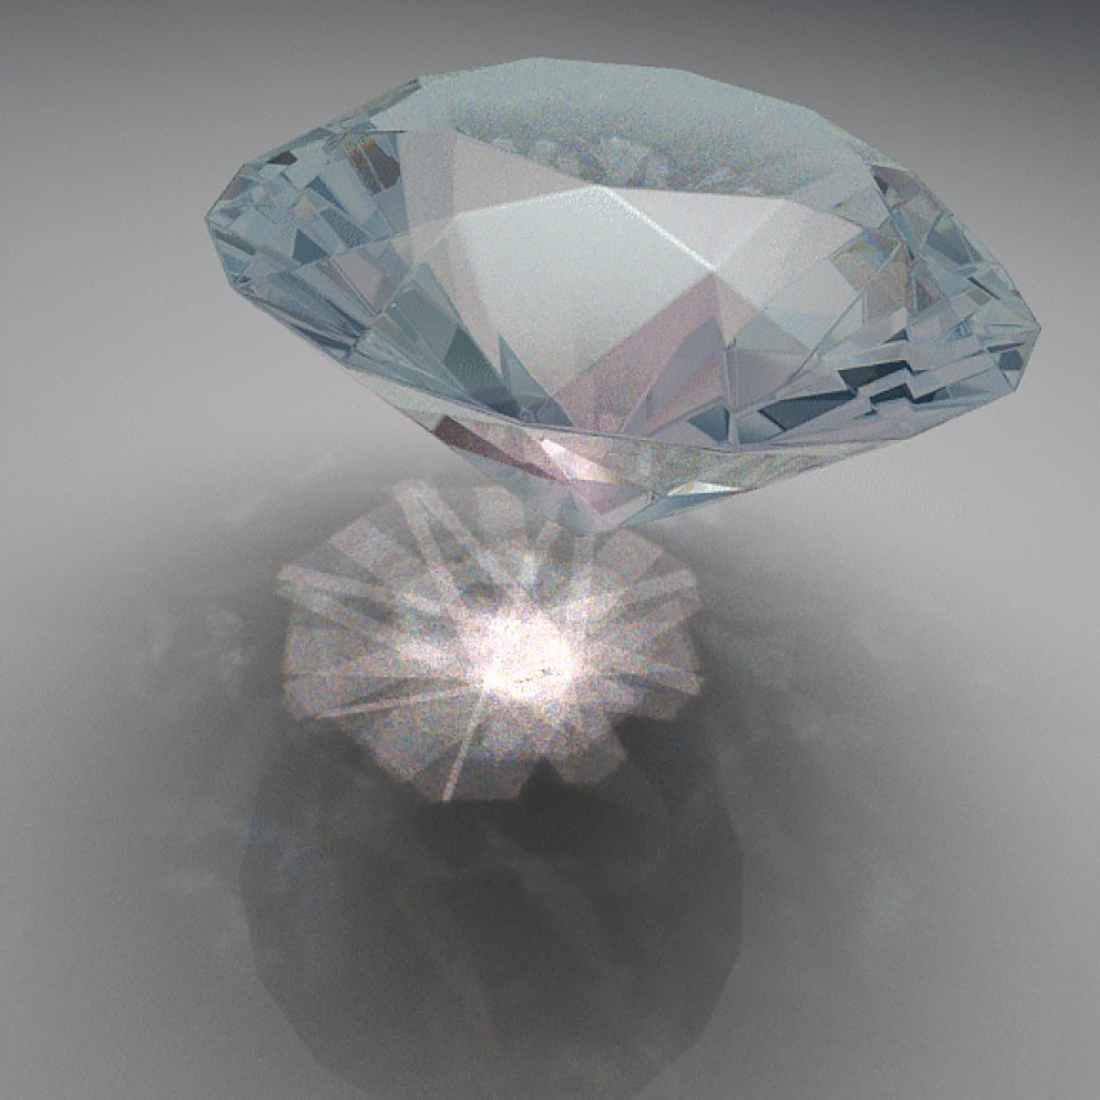 Image of a gorgeous 3d model of a diamond